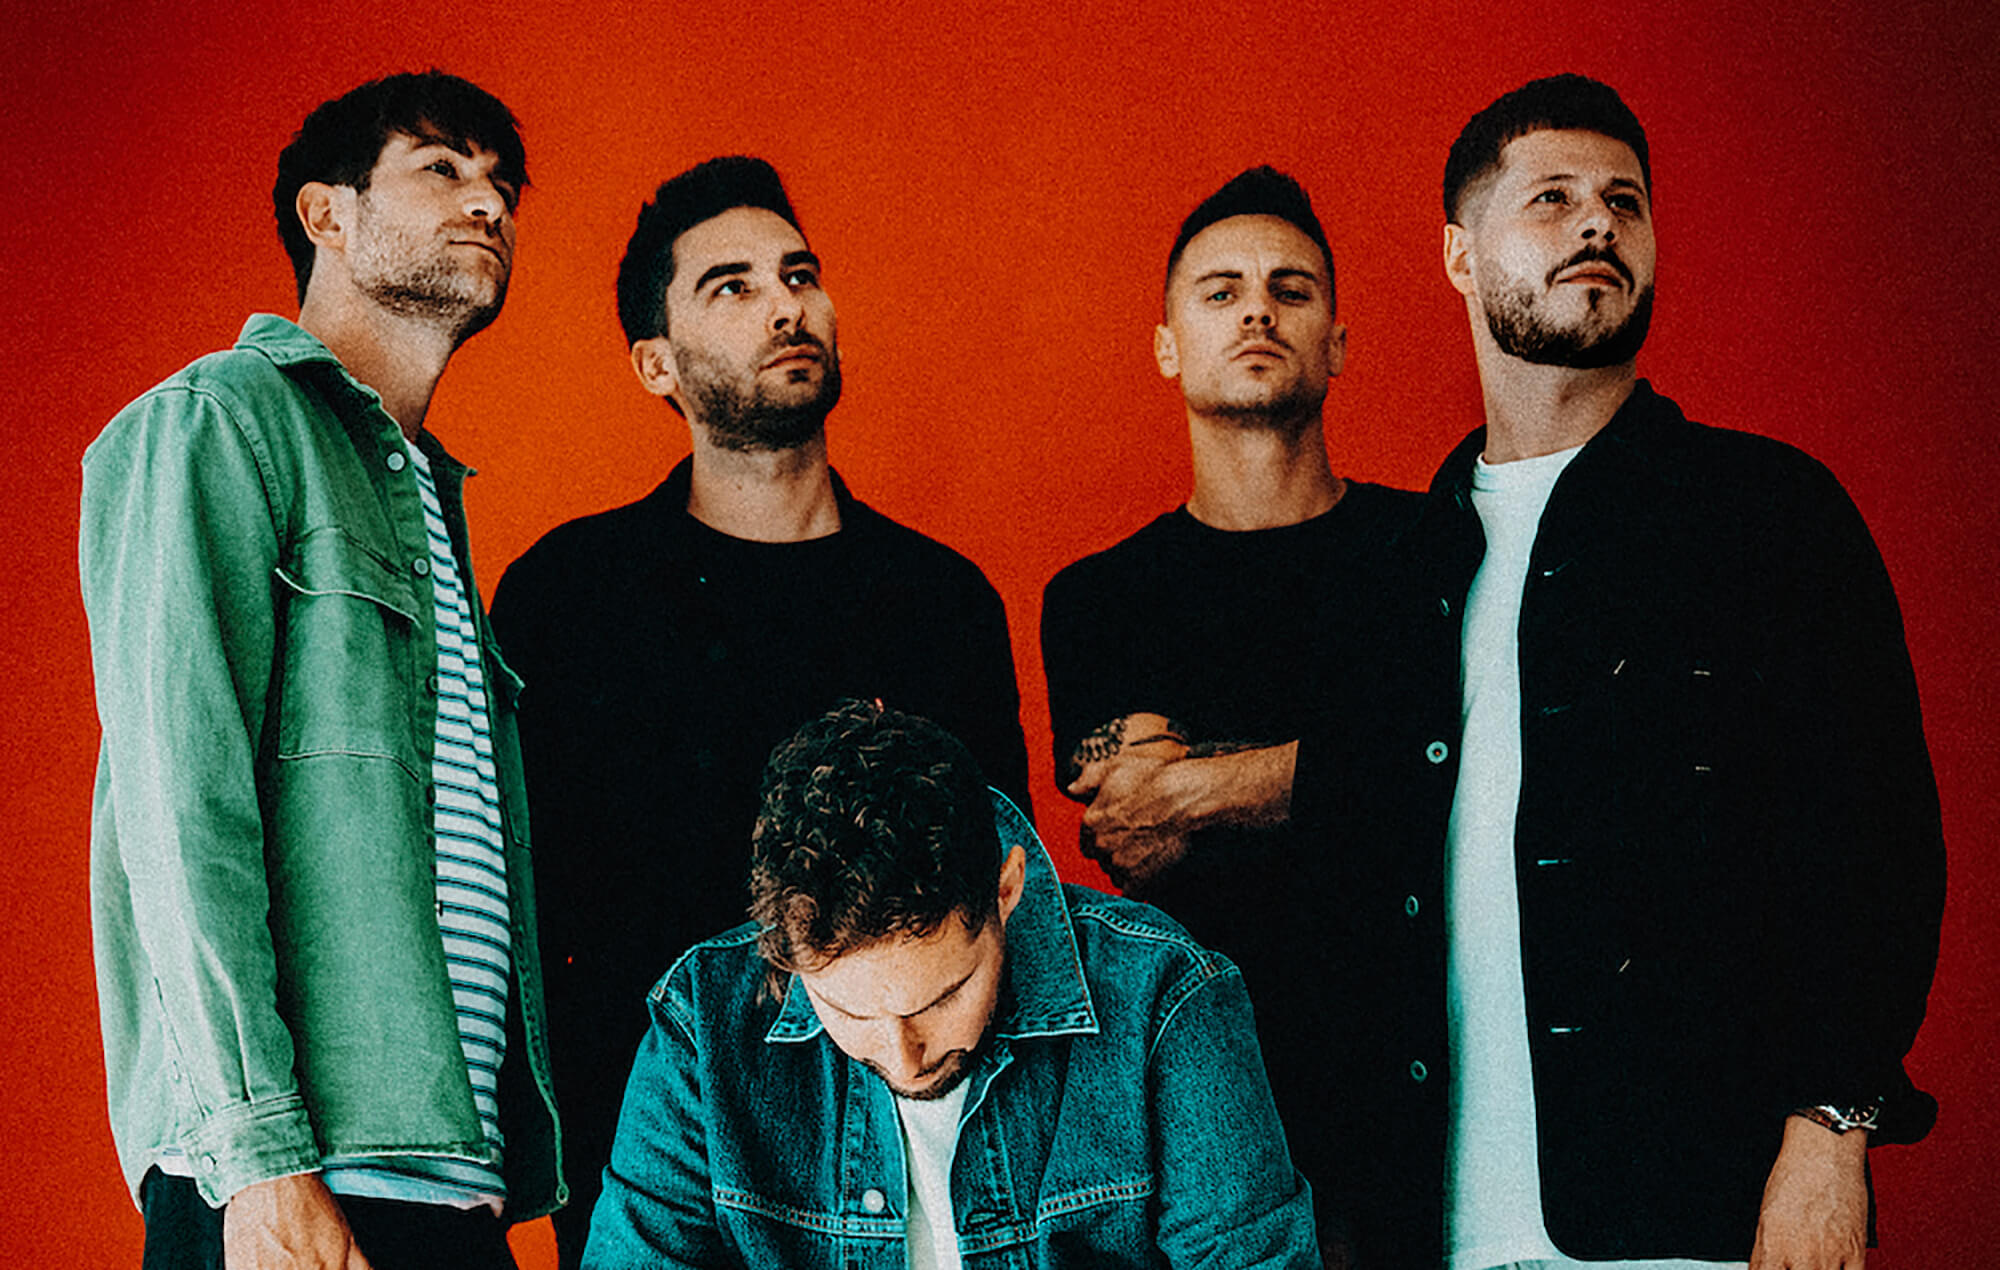 YOU ME AT SIX DROP MUSIC VIDEO FOR NEW SINGLE “MAKEMEFEELALIVE”